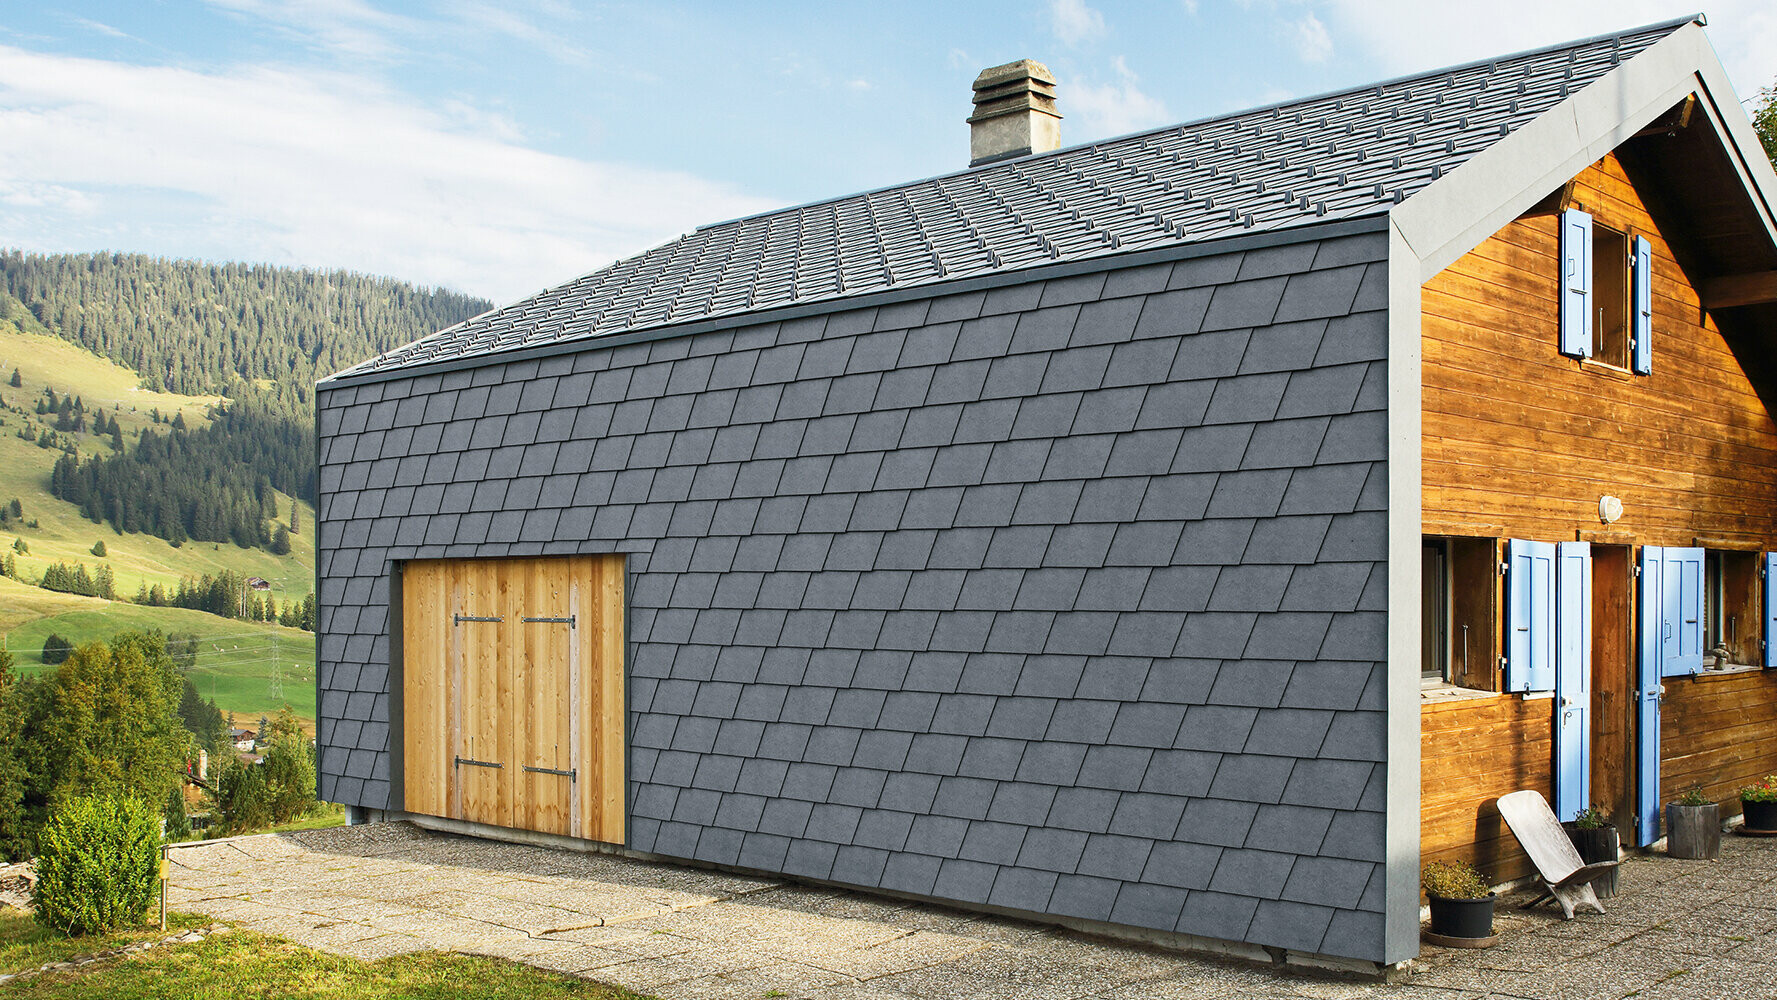 Modern detached house clad with PREFA façade shingles in anthracite and wooden elements.